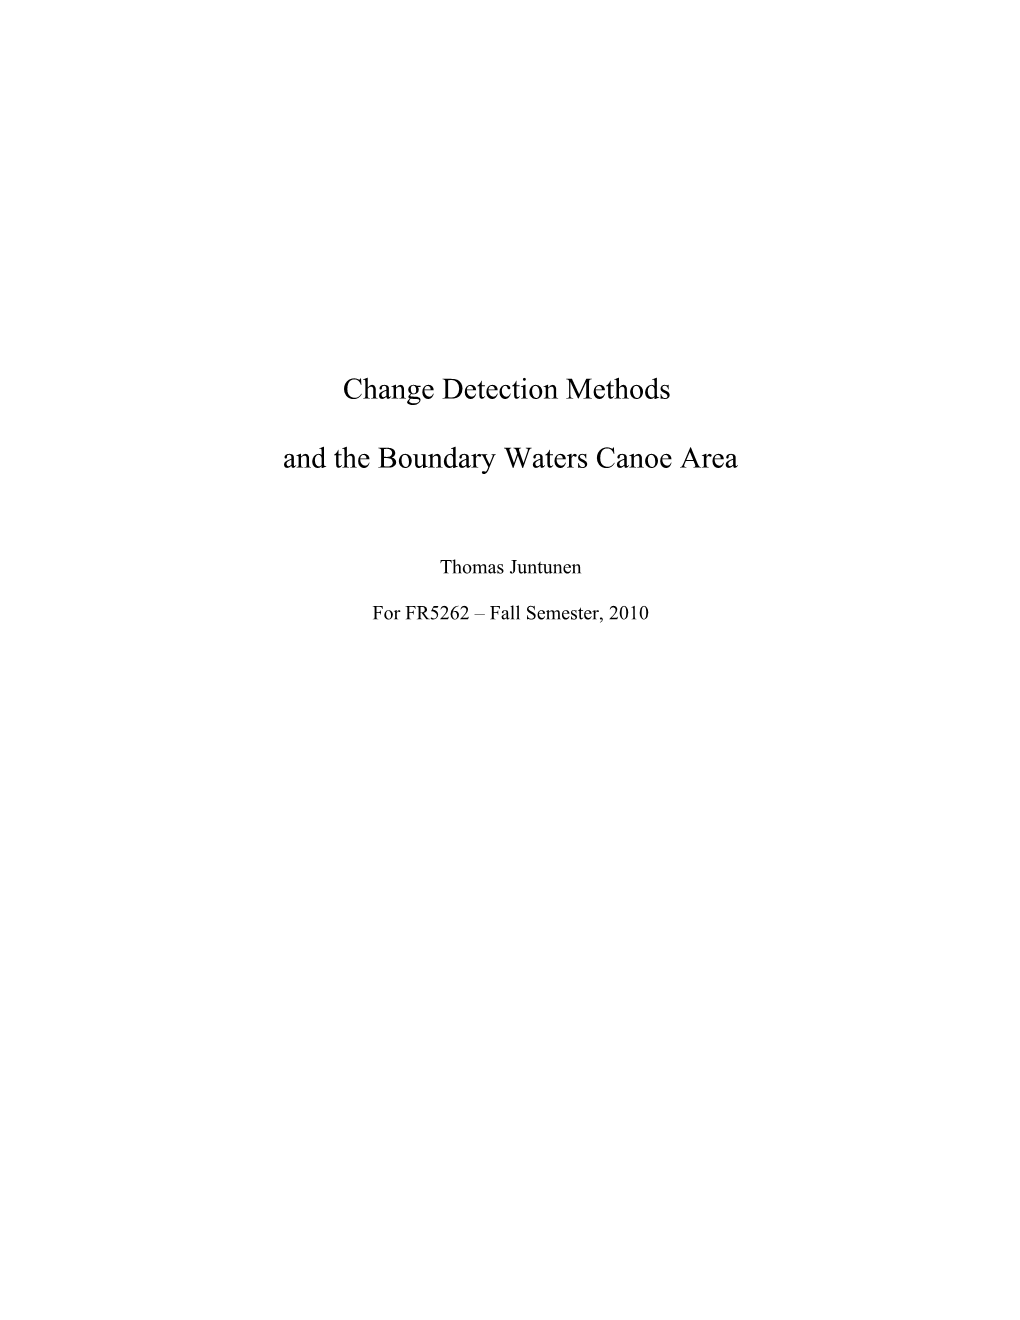 Change Detection Methods and the Boundary Waters Canoe Area